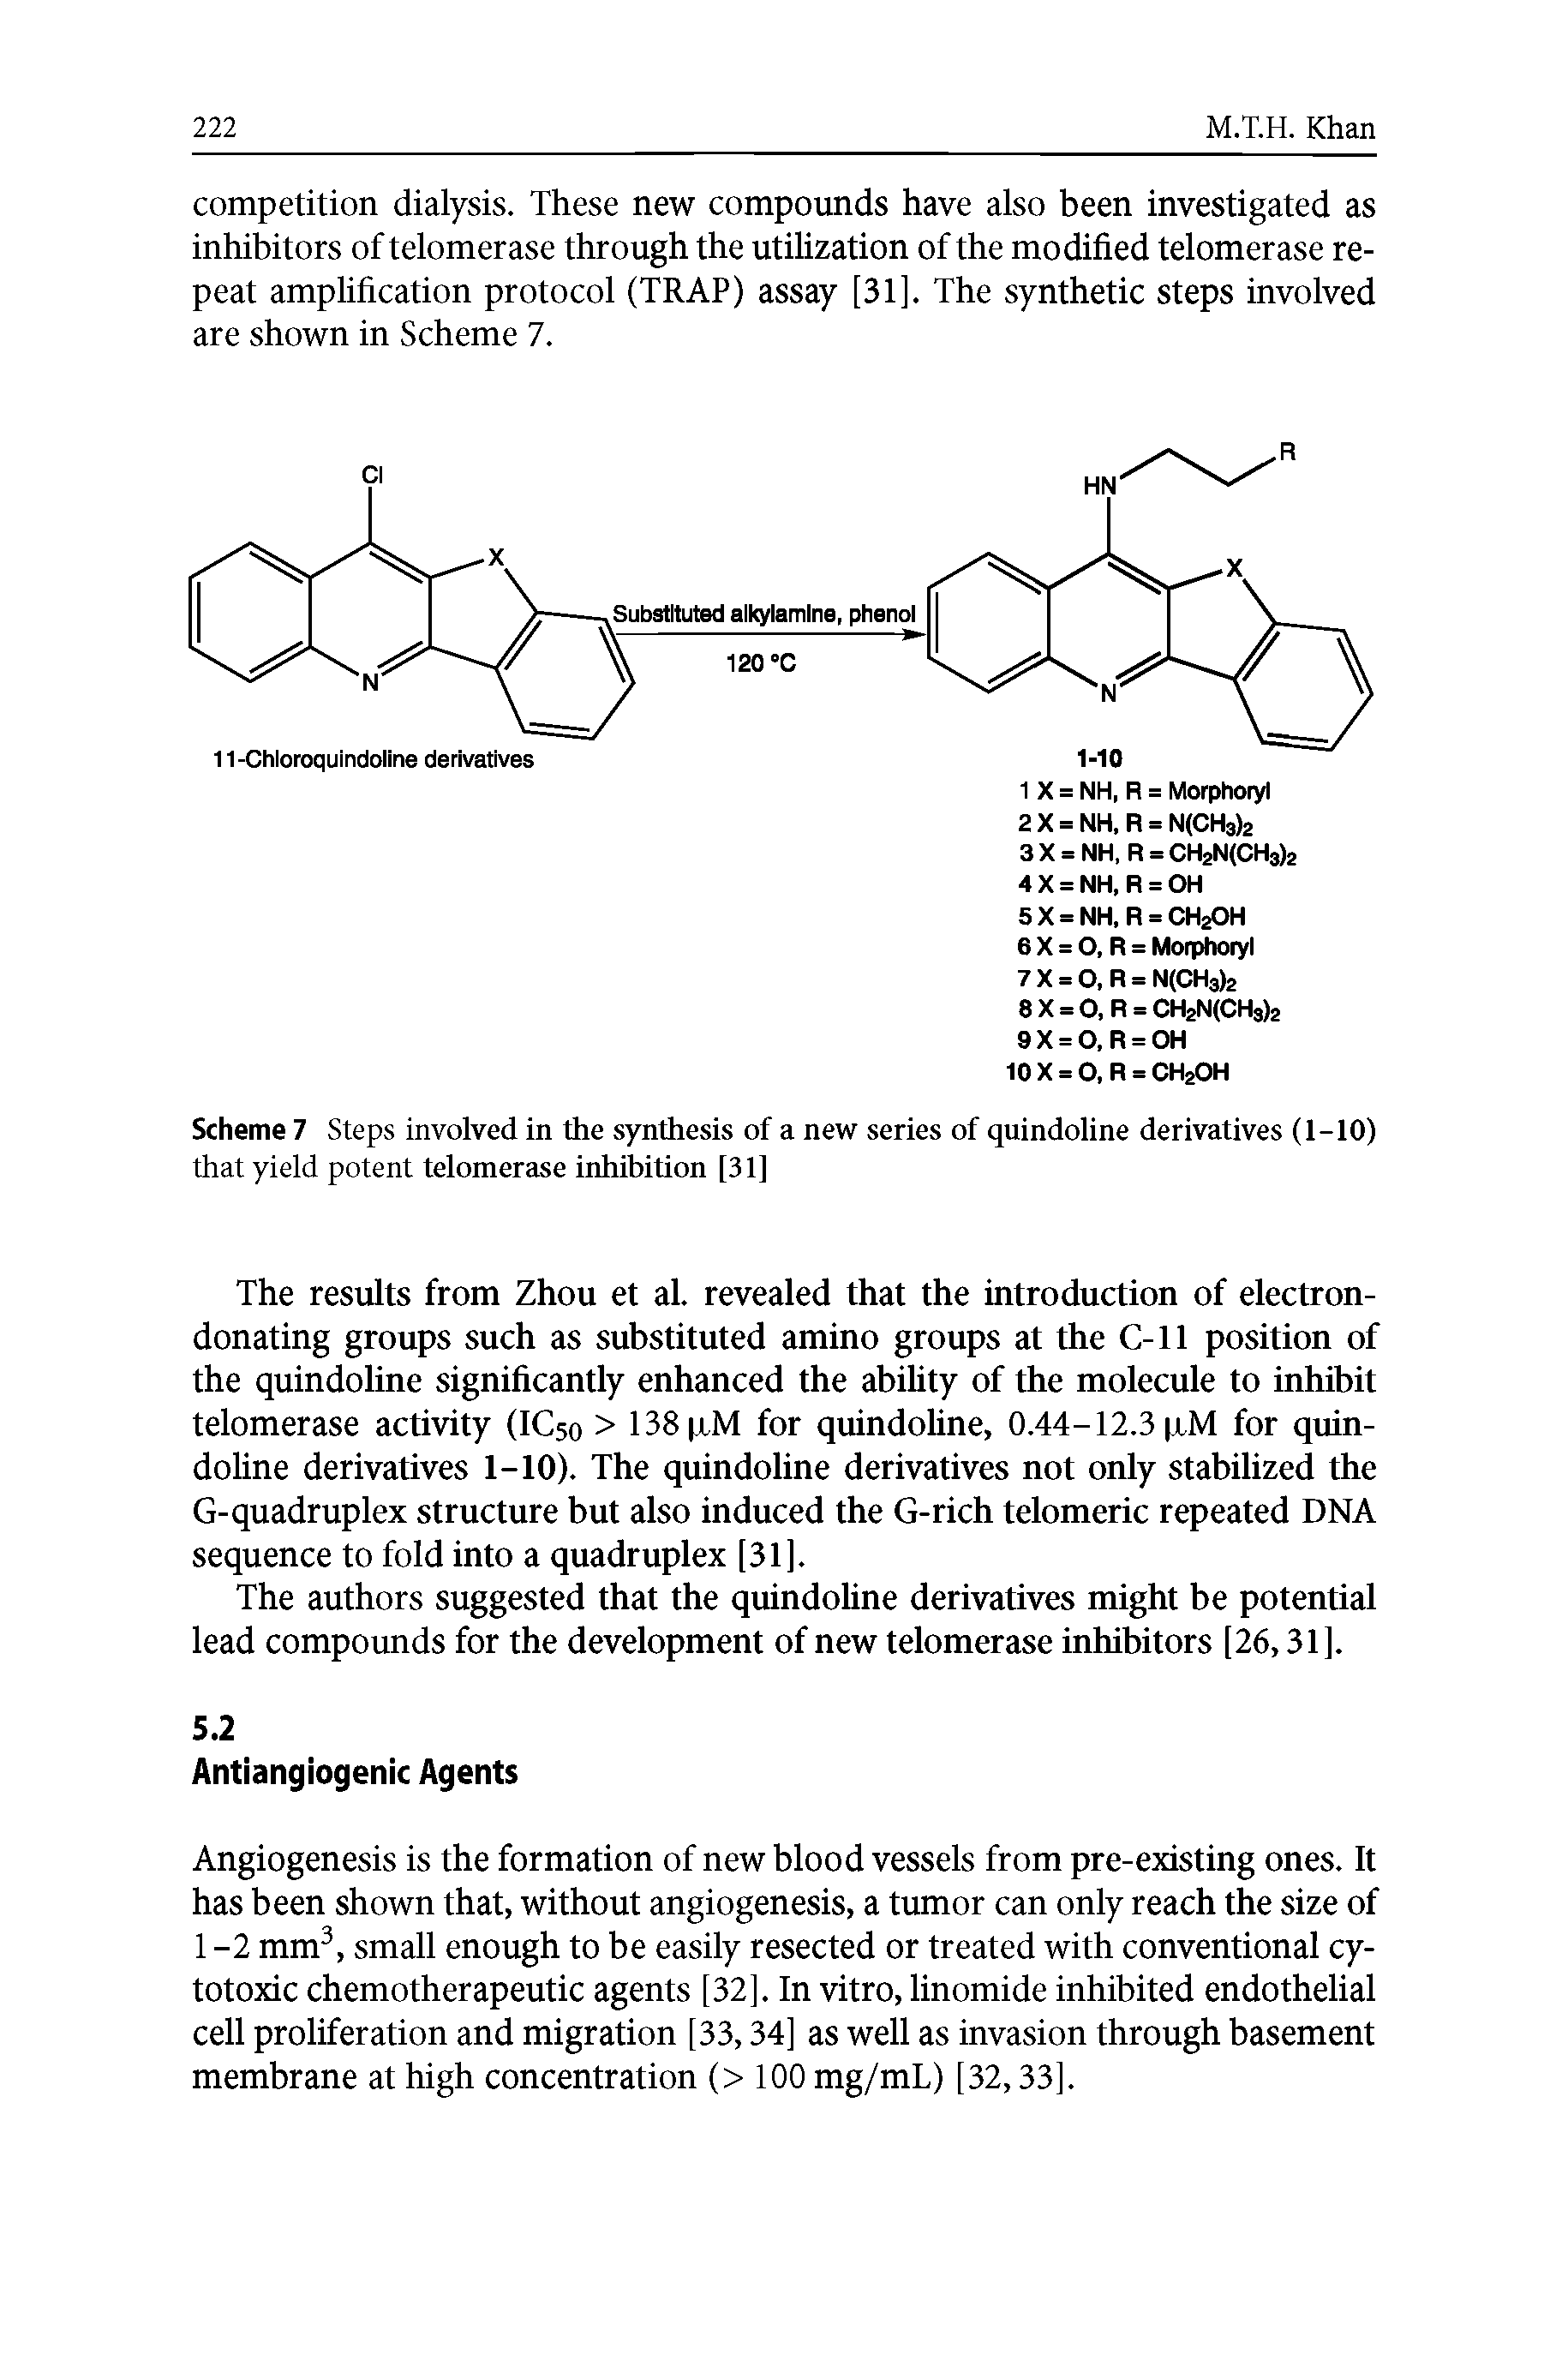 Scheme 7 Steps involved in the synthesis of a new series of quindoline derivatives (1-10) that yield potent telomerase inhibition [31]...